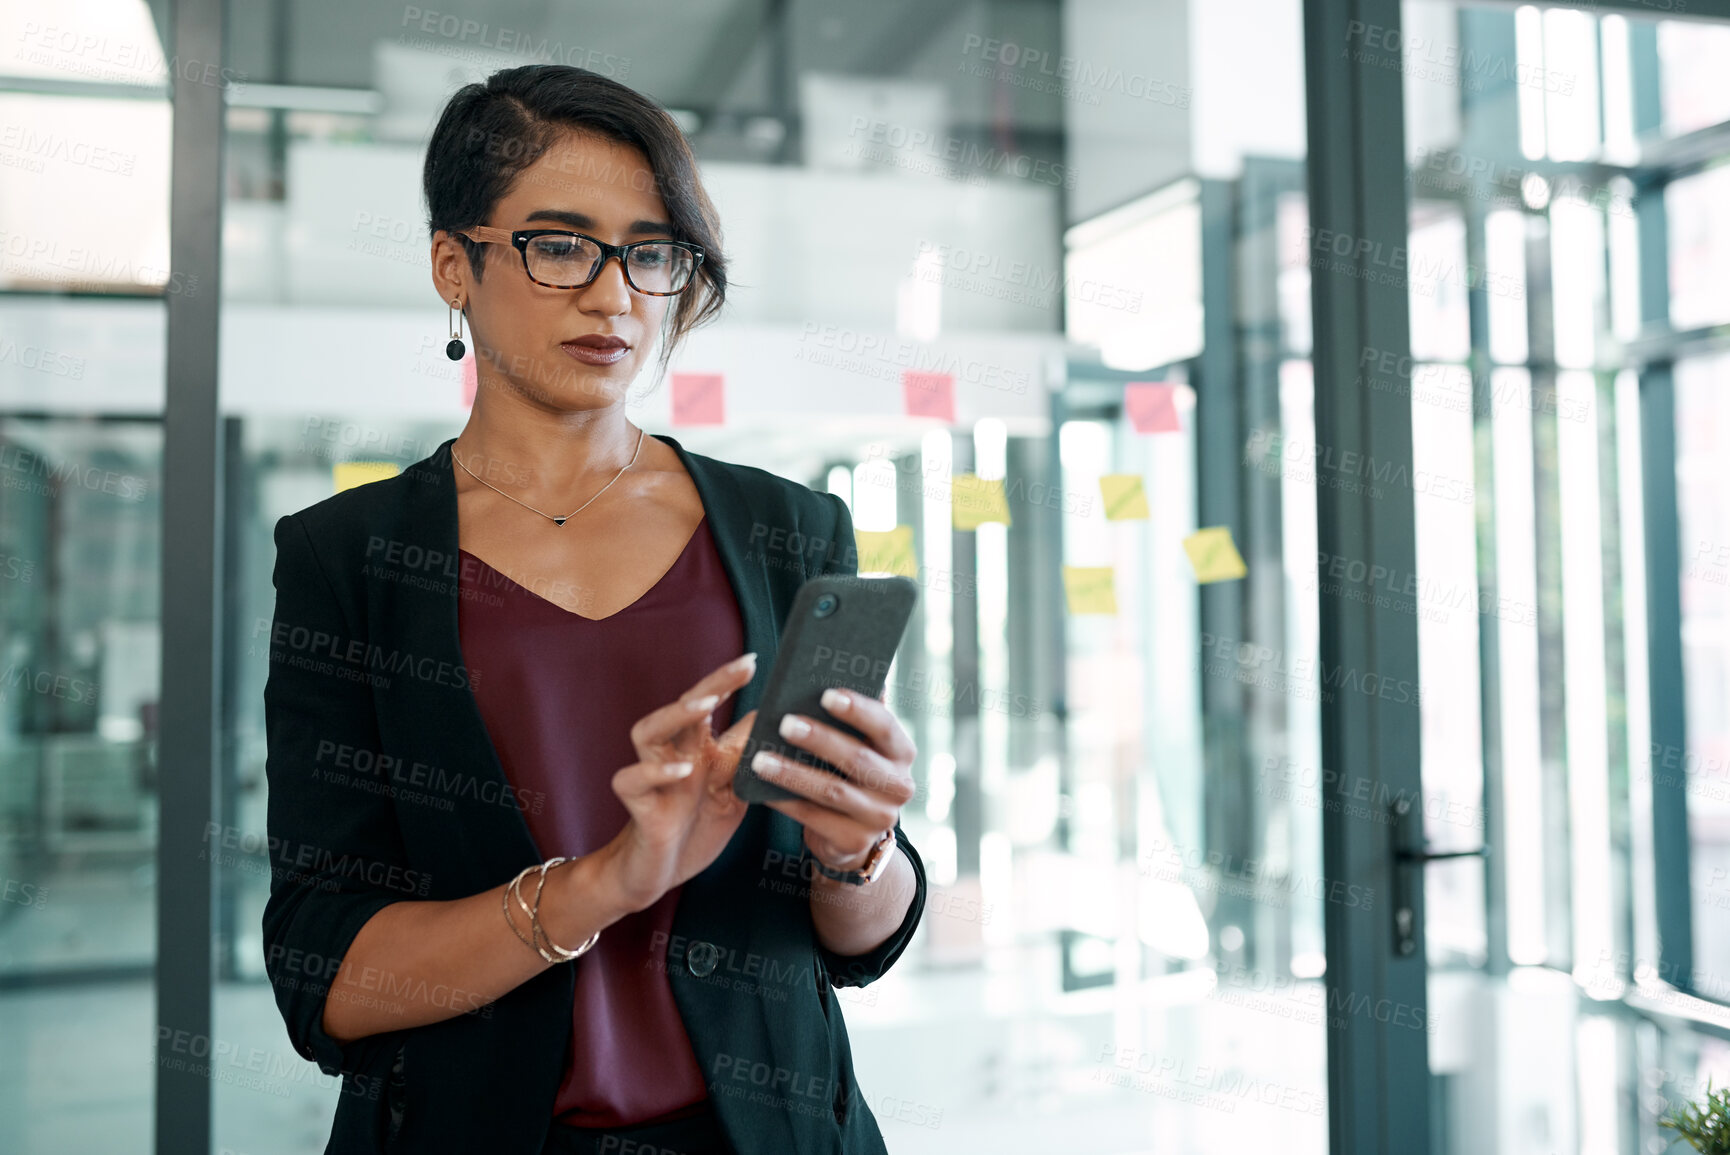 Buy stock photo Shot of an attractive young businesswoman standing alone in the office and using her cellphone